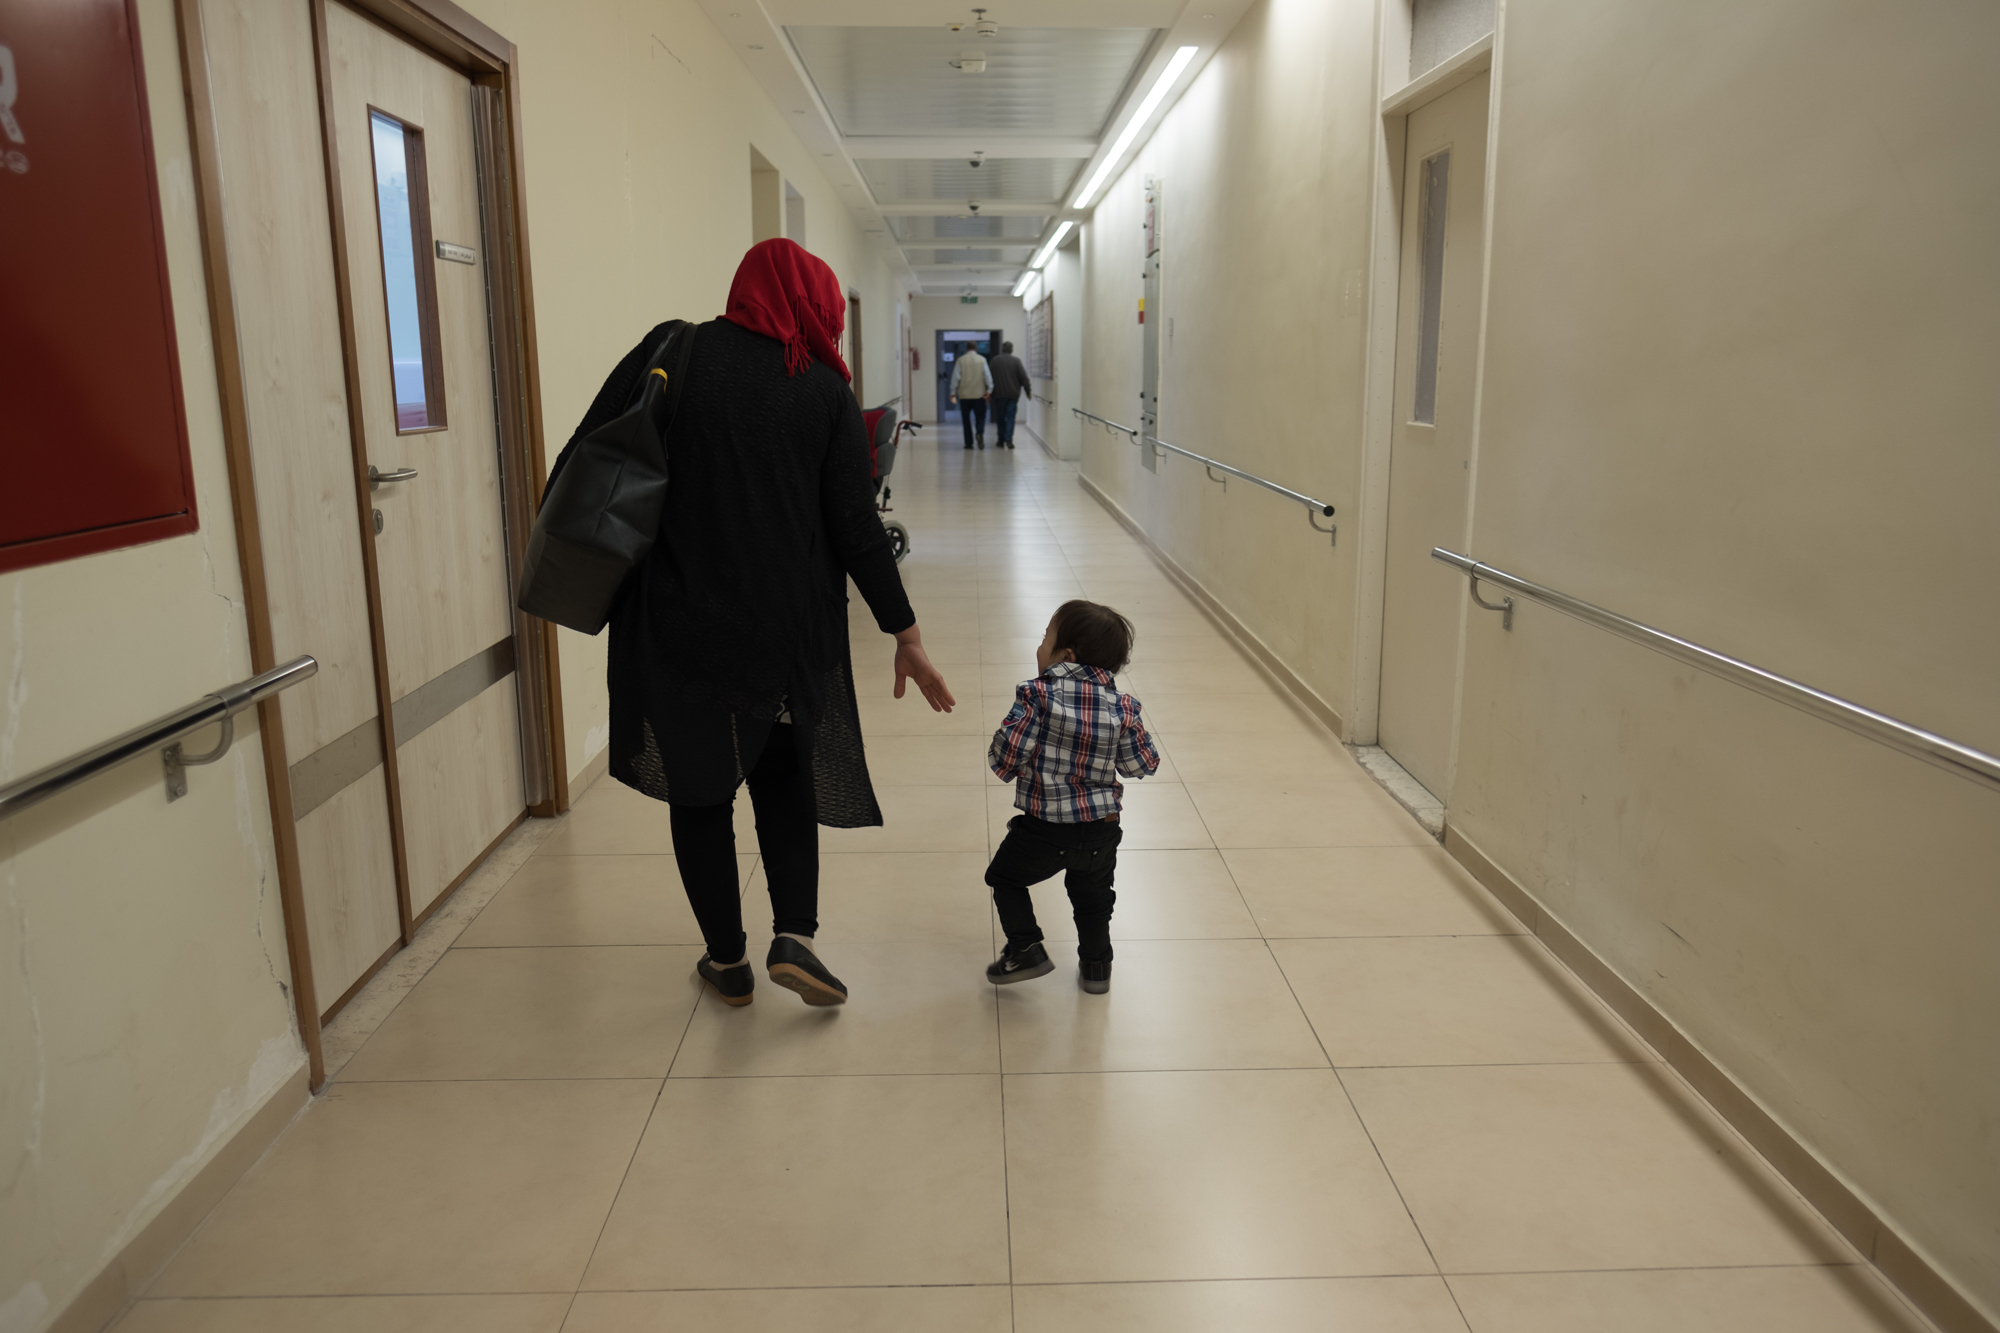 Anas, a two-year-old with downs syndrome, heads down the hall with his mother after occupational therapy at the Jerusalem Princess Basma Center, on Tuesday, 30 October, 2018. Photo by Ben Gray / LWF